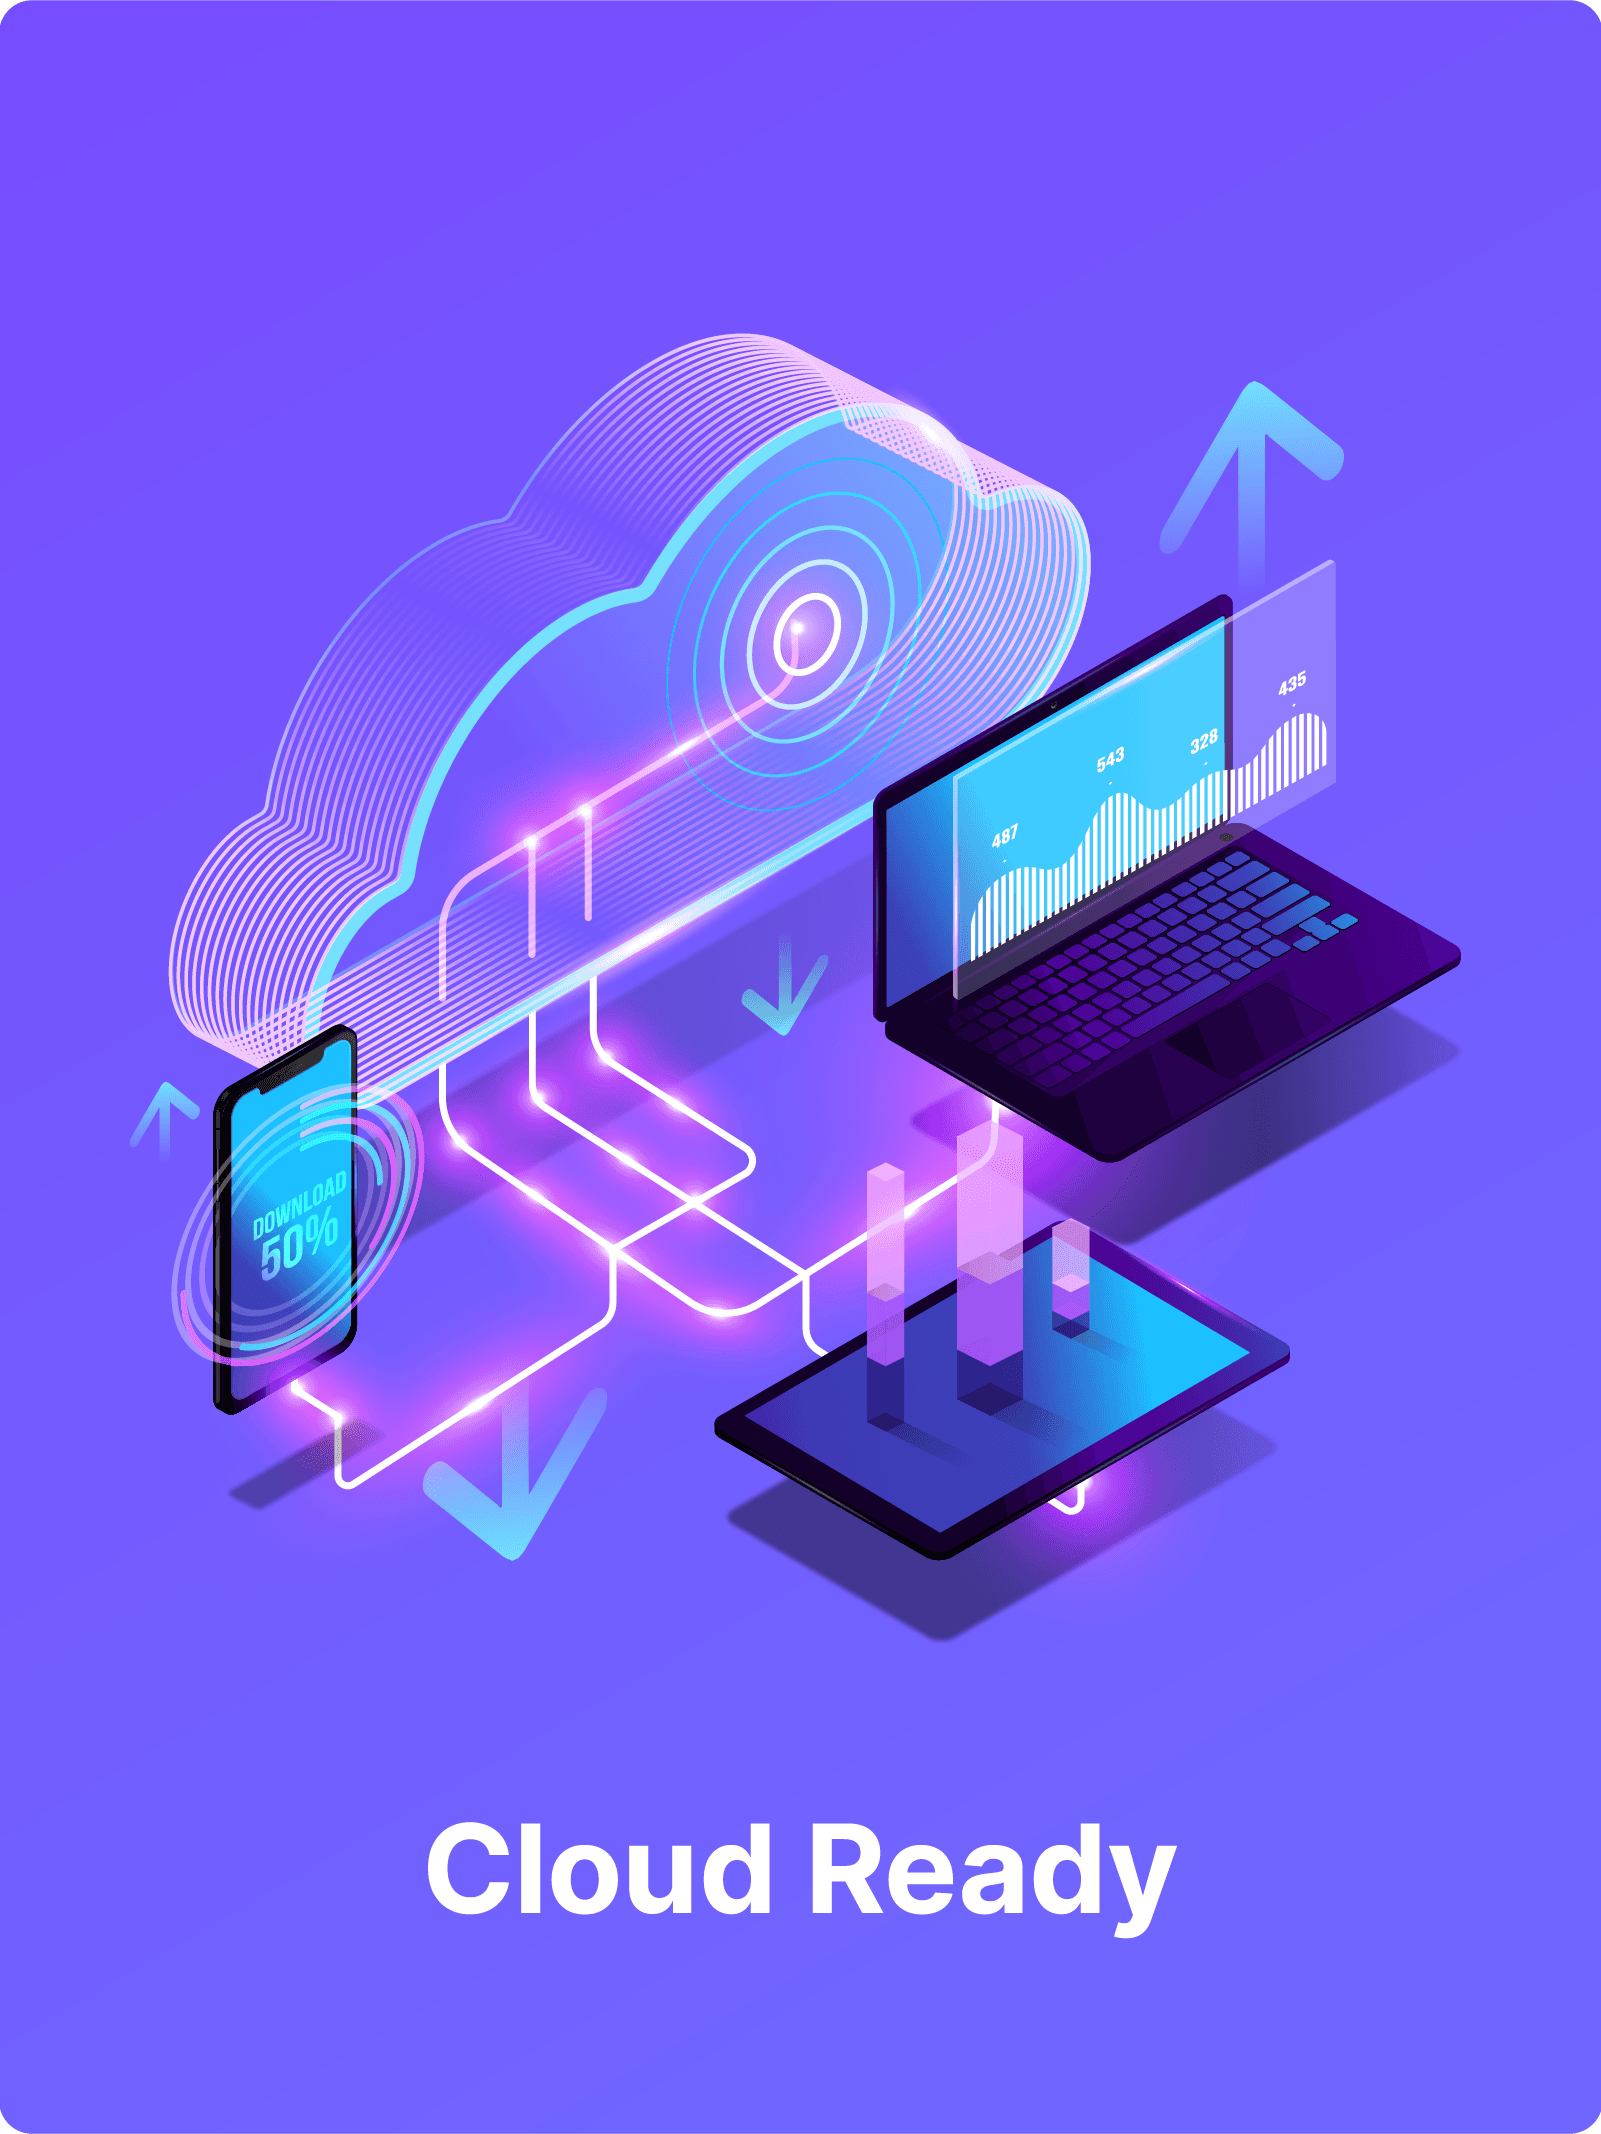 Our Web apps is Cloud ready